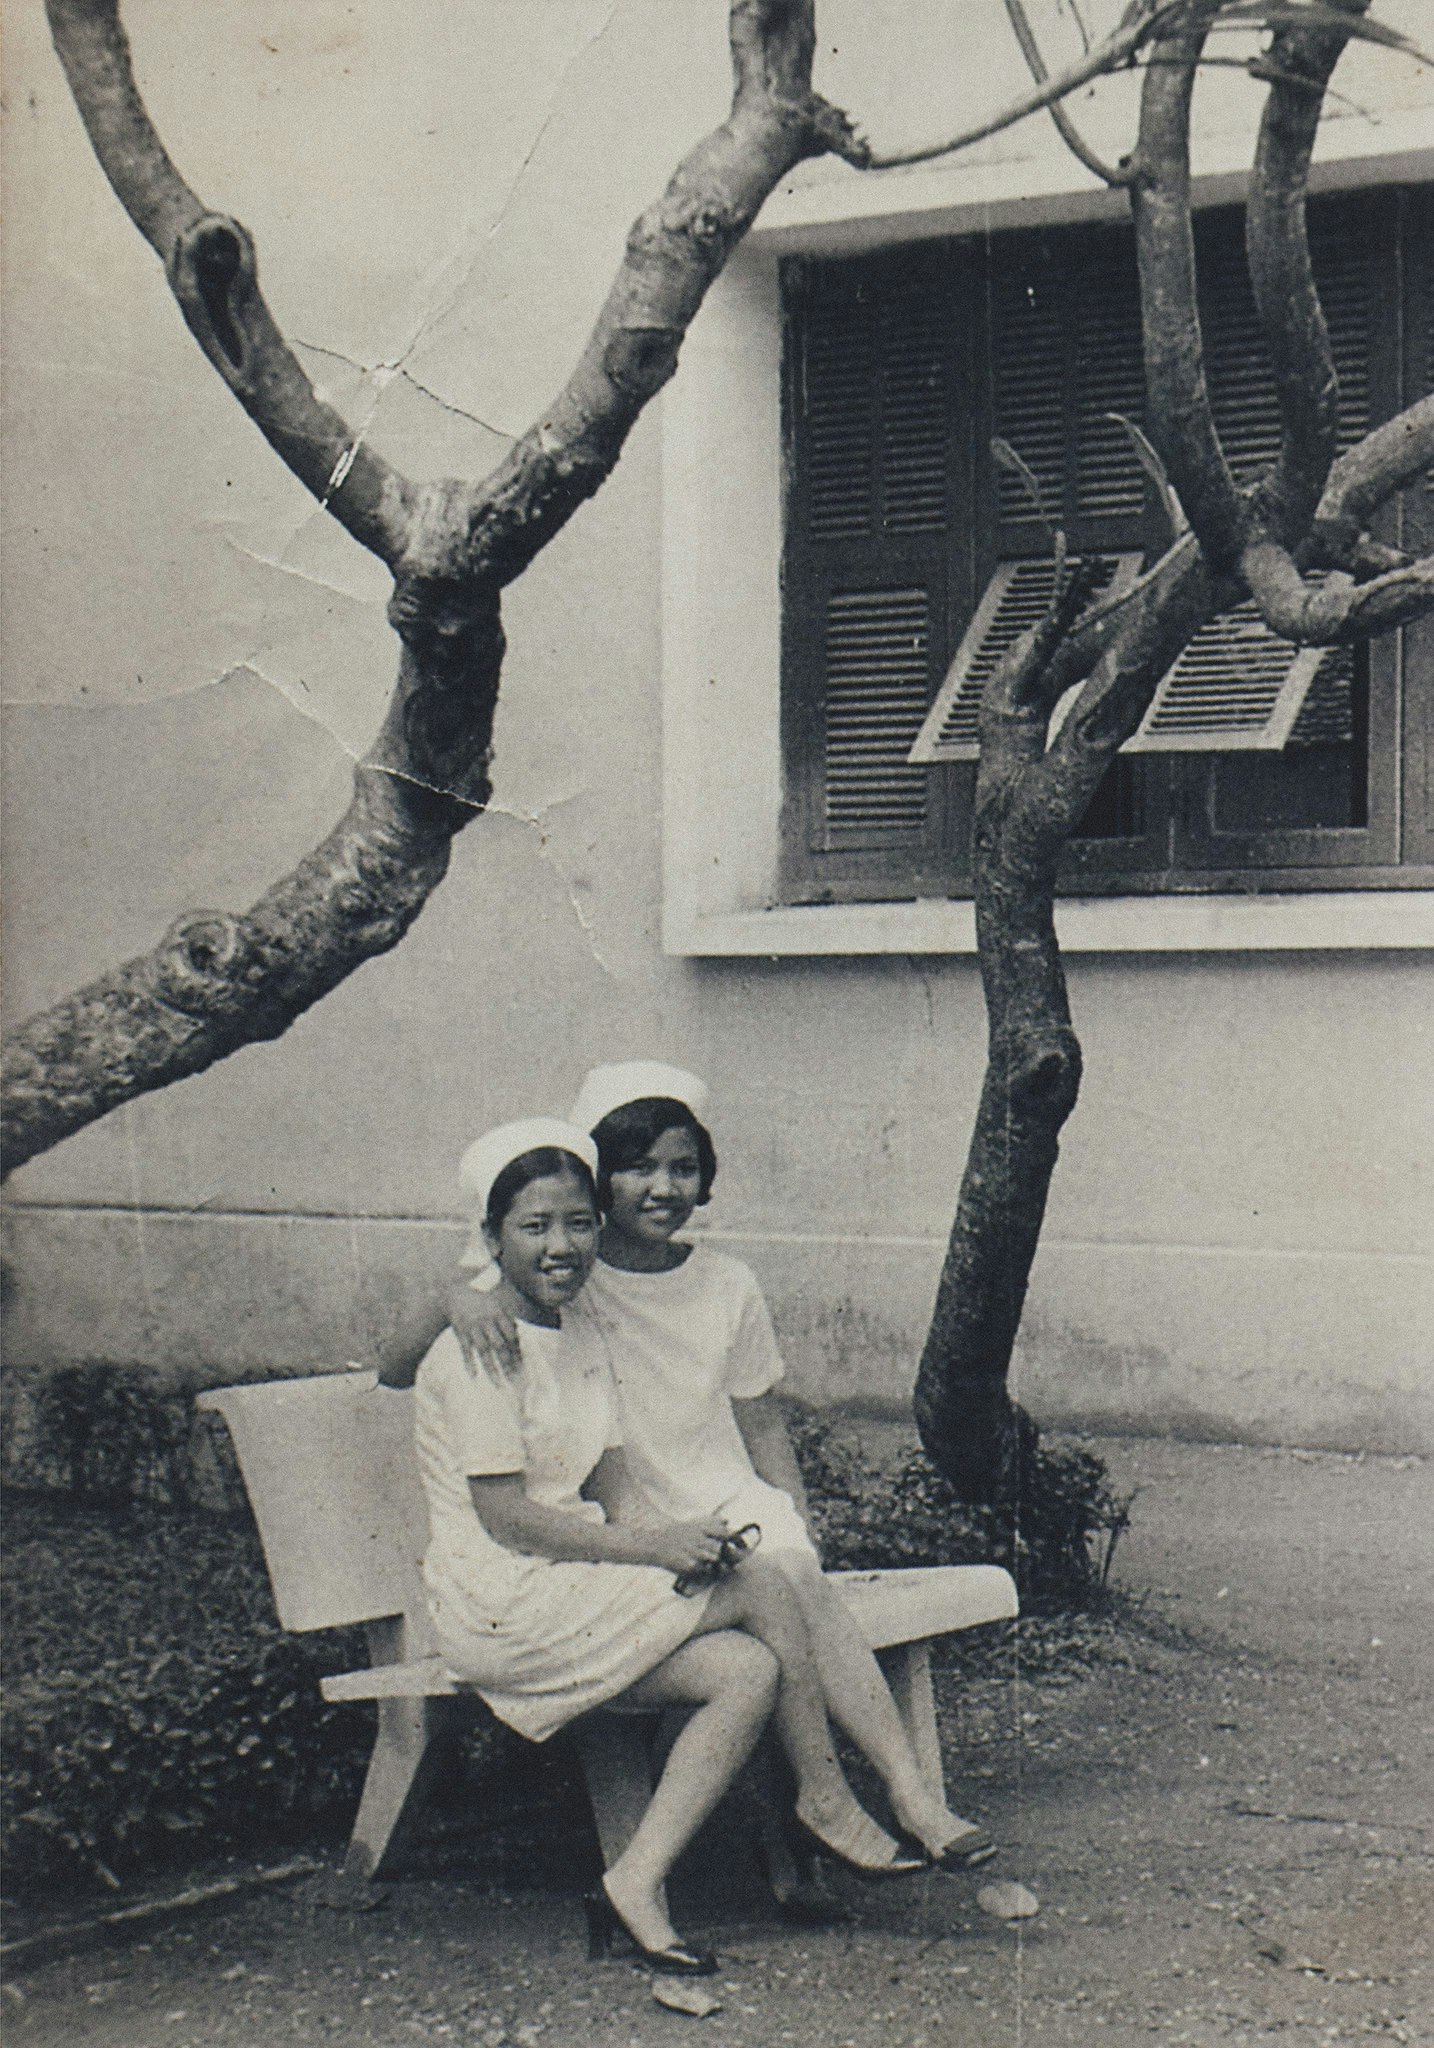 Sepia toned image of Hồng-Ân Trương's mother and her classmate sitting on a bench at 17 years old.